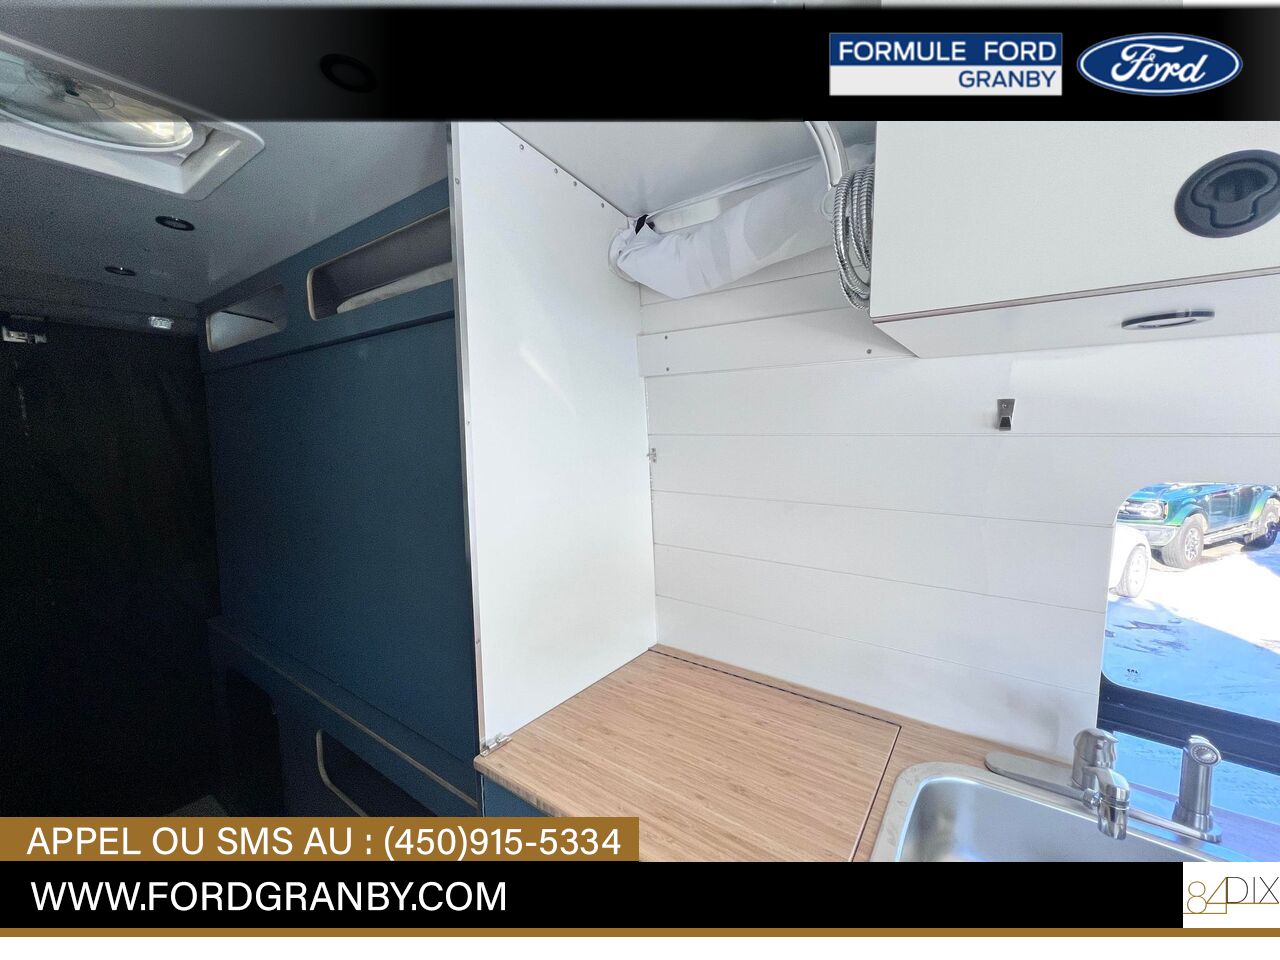 Ford Transit fourgon utilitaire 2019 Granby - photo #33